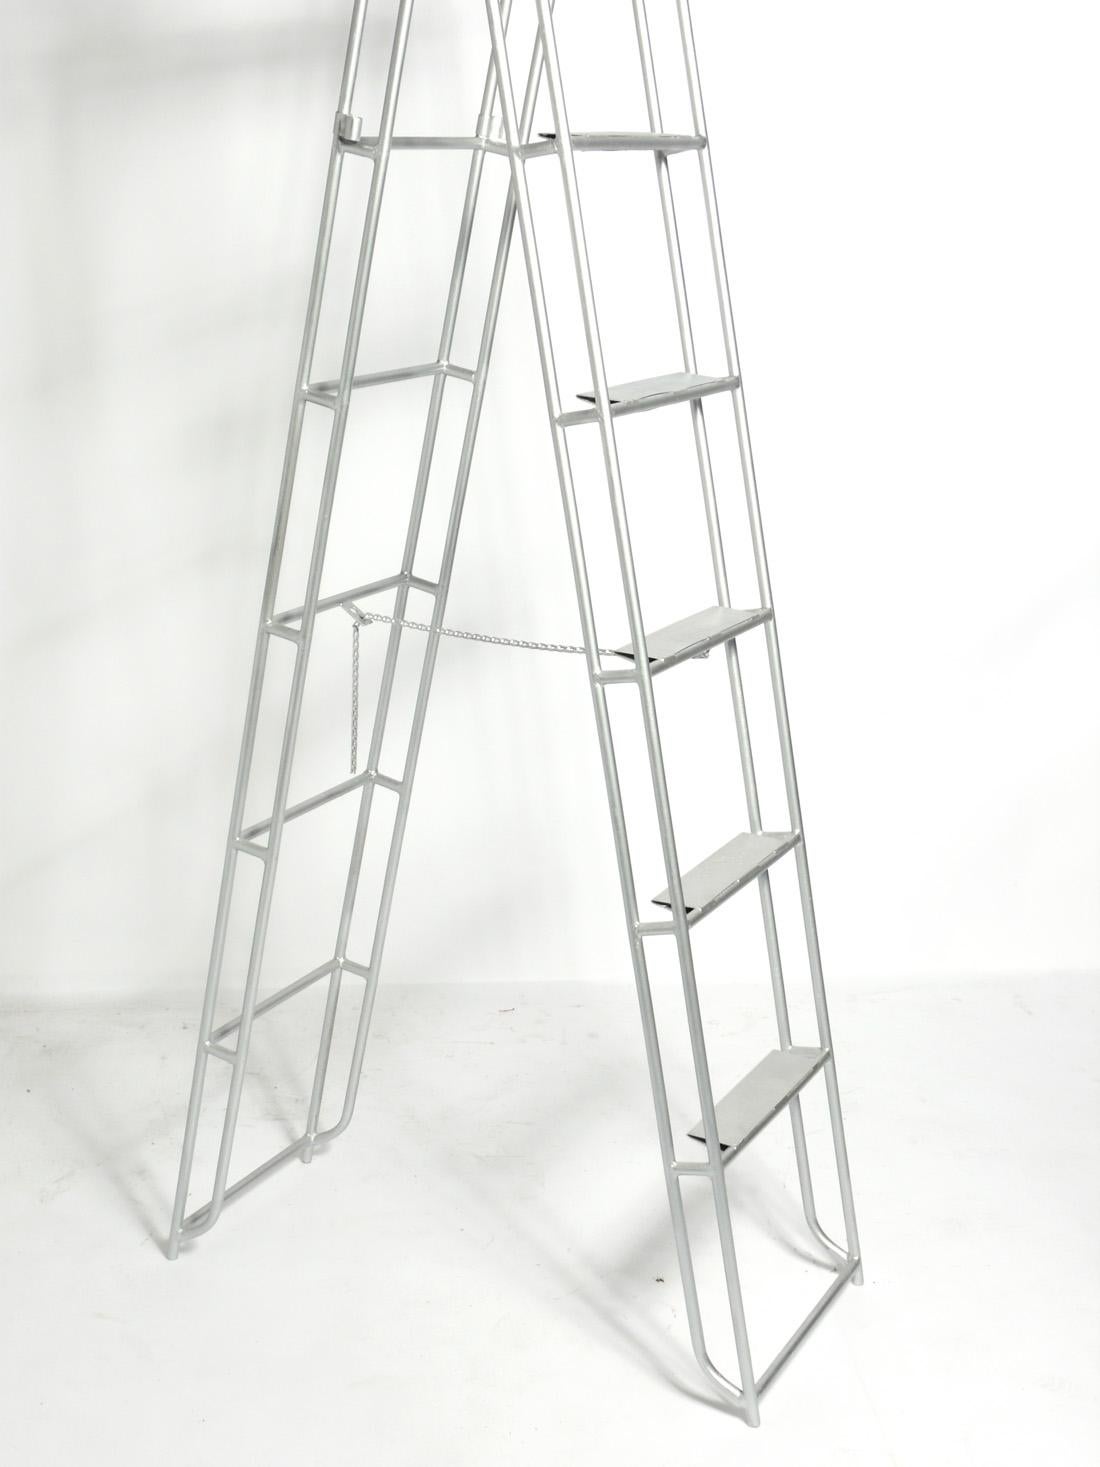 American Hand Made Industrial Ladder, circa 1940s